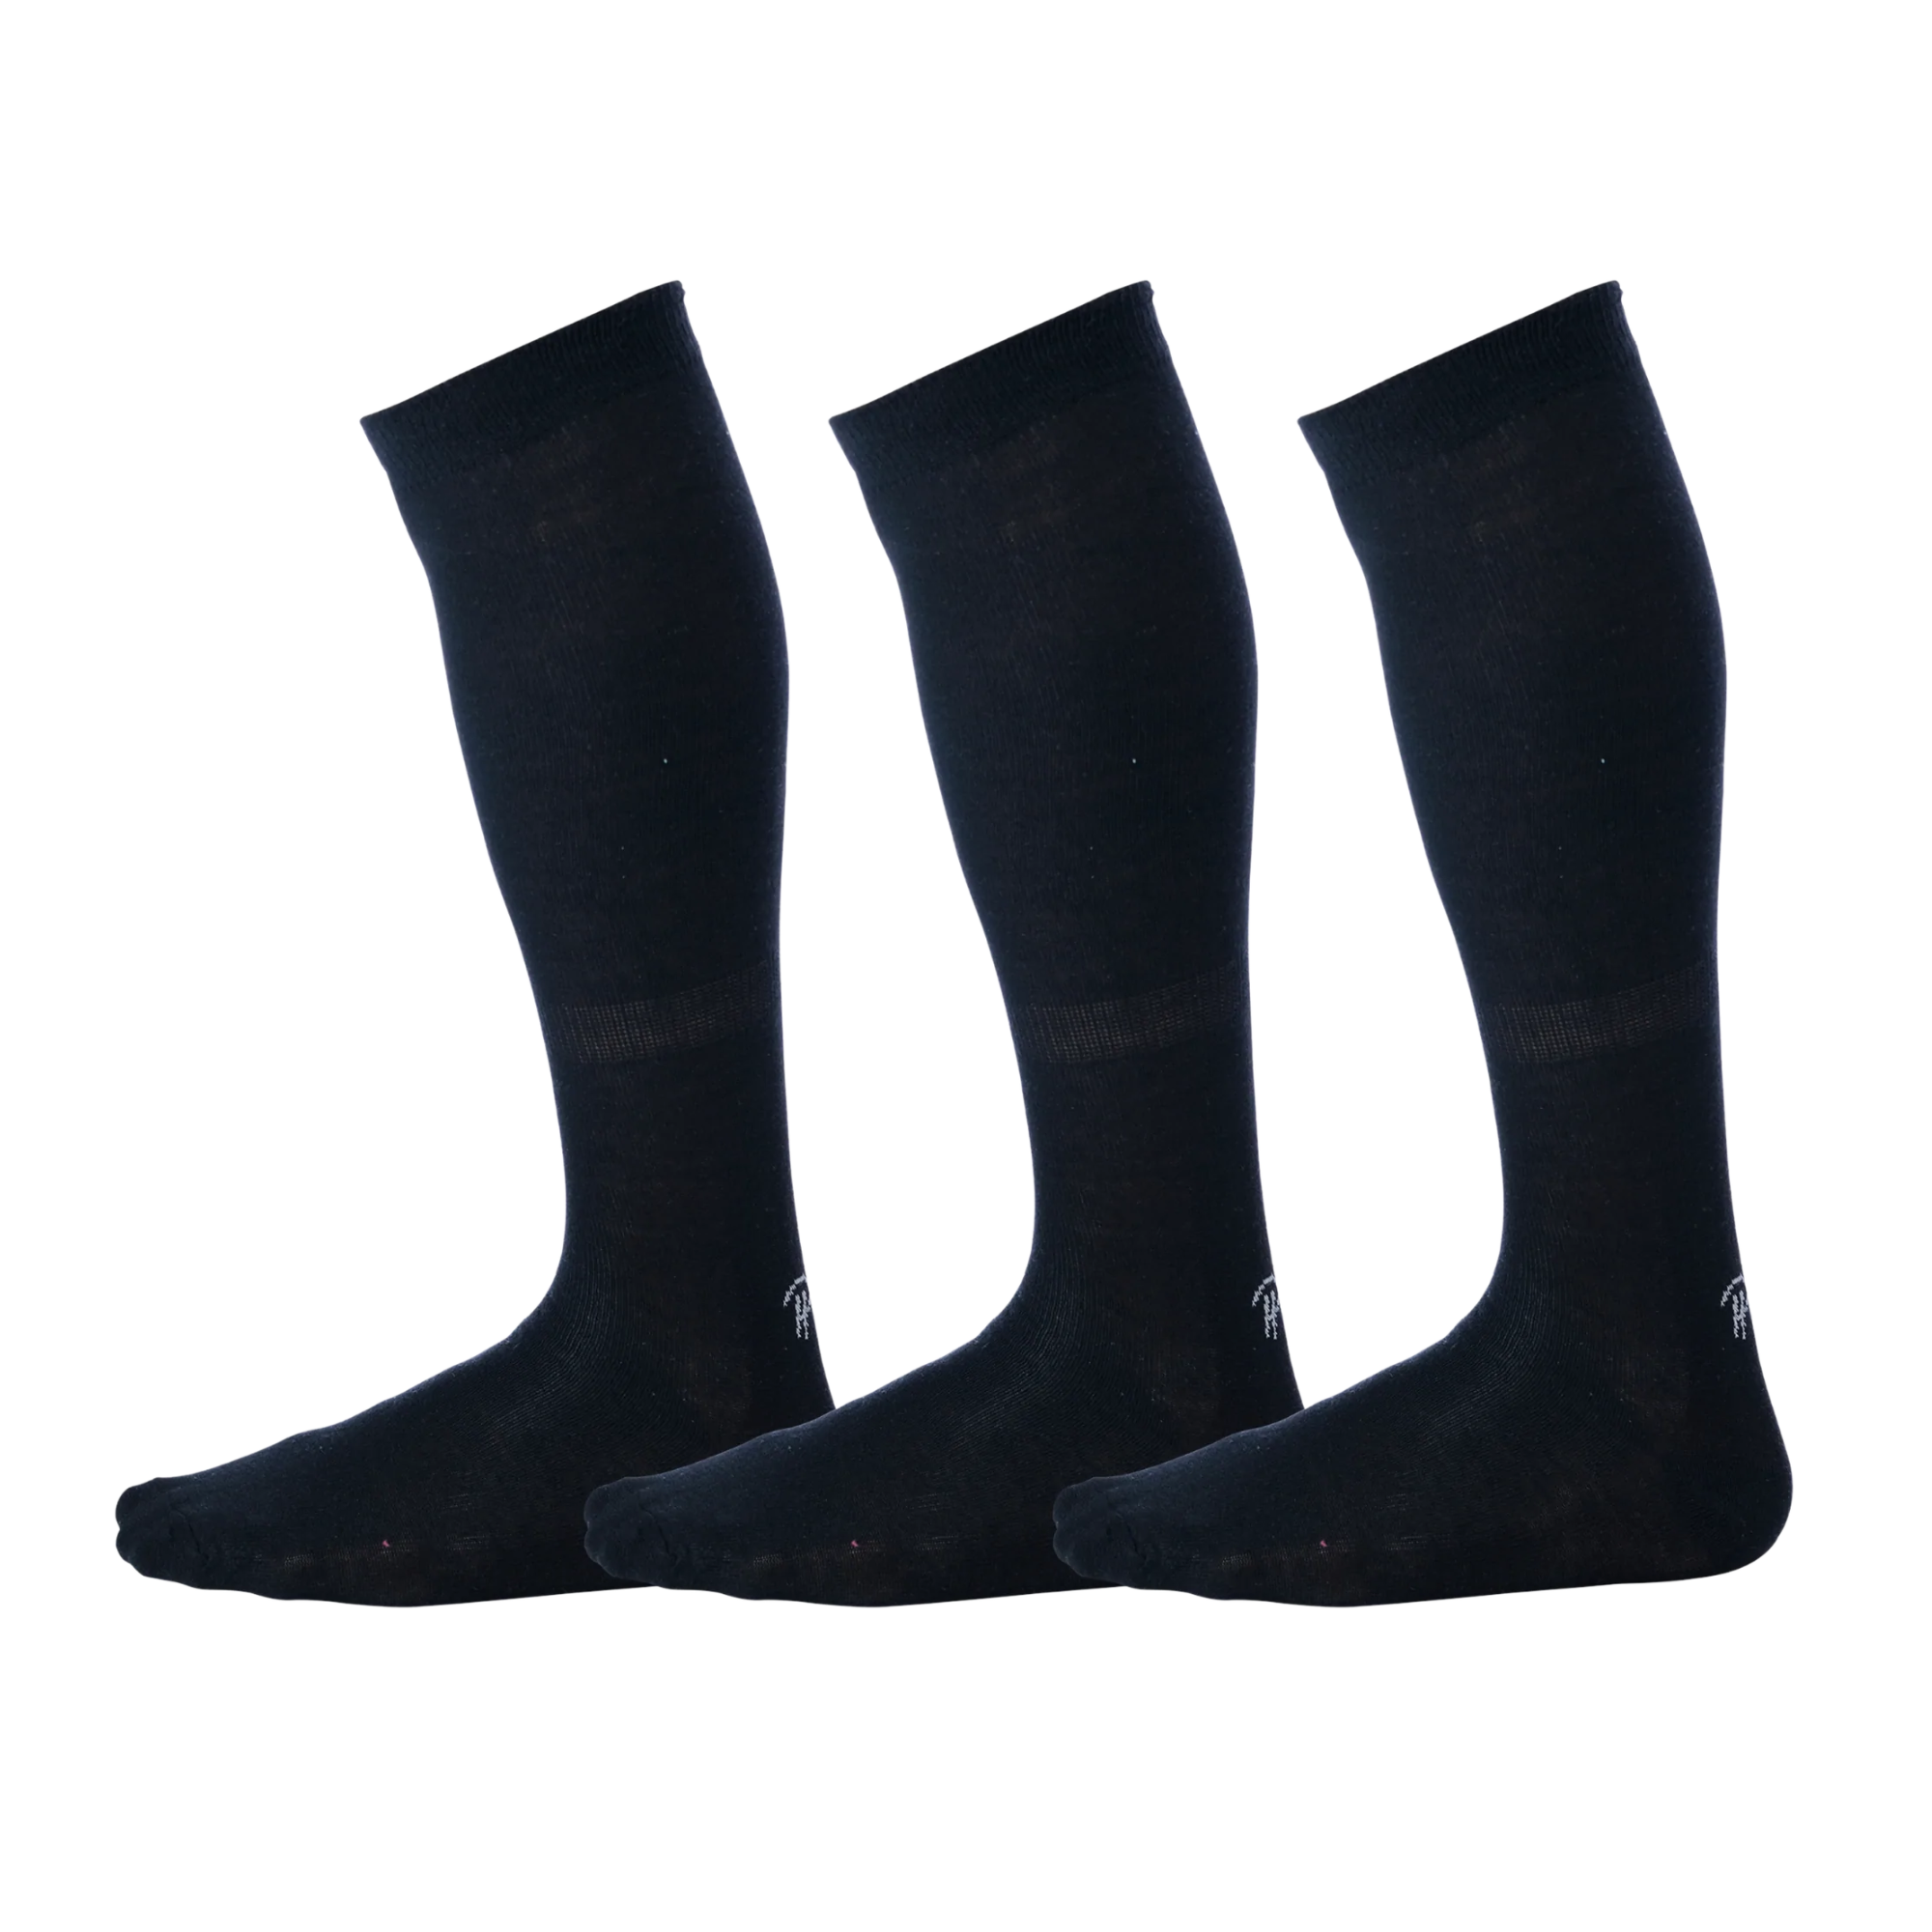 three pairs of solid black over the calf dress socks